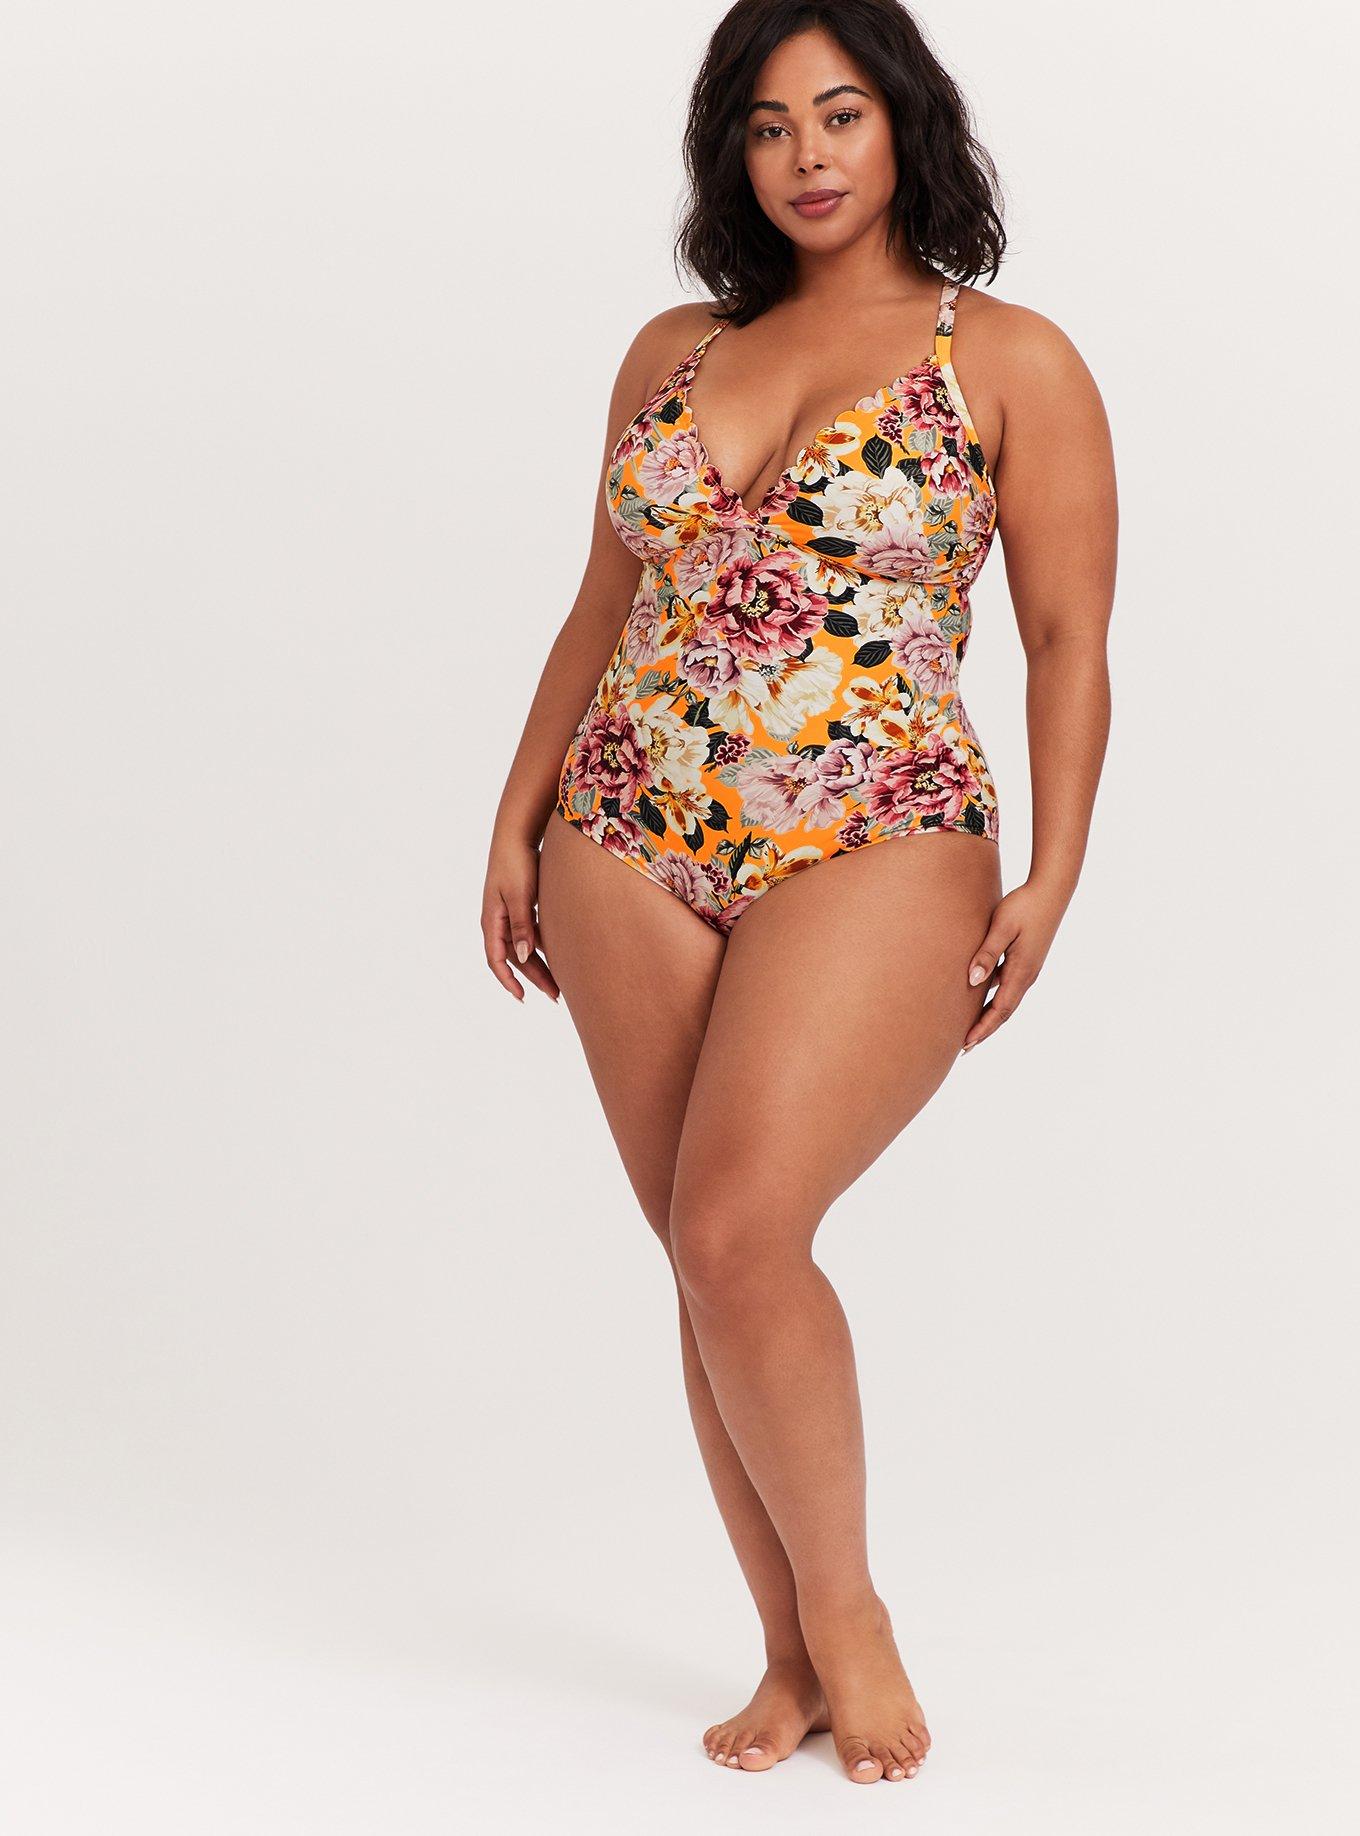 outlet online USA Lucky brand patterned one-piece floral swimsuit, size S.